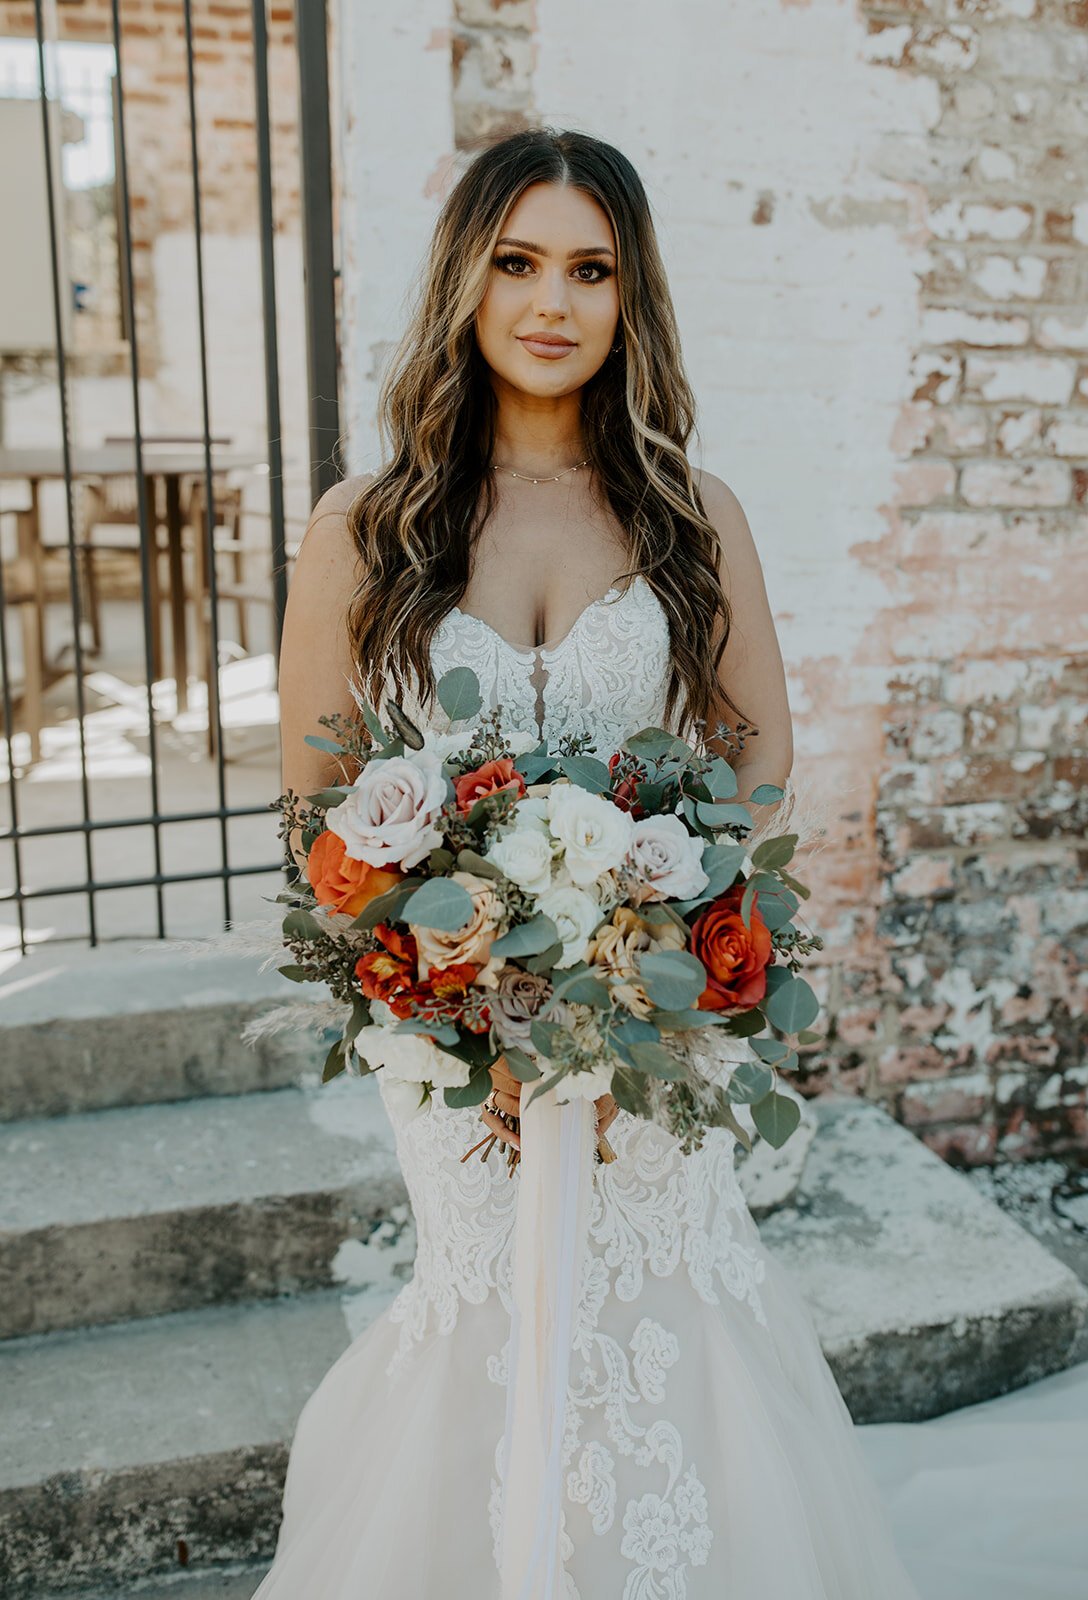 ivory-and-beau-bride-and-florals-jessica-and-ian-savannah-wedding-the-clyde-venue-boho-wedding-boho-bride-wedding-blog-maggie-sottero-wedding-dress-real-wedding-real-bride-1B8A1282.jpg